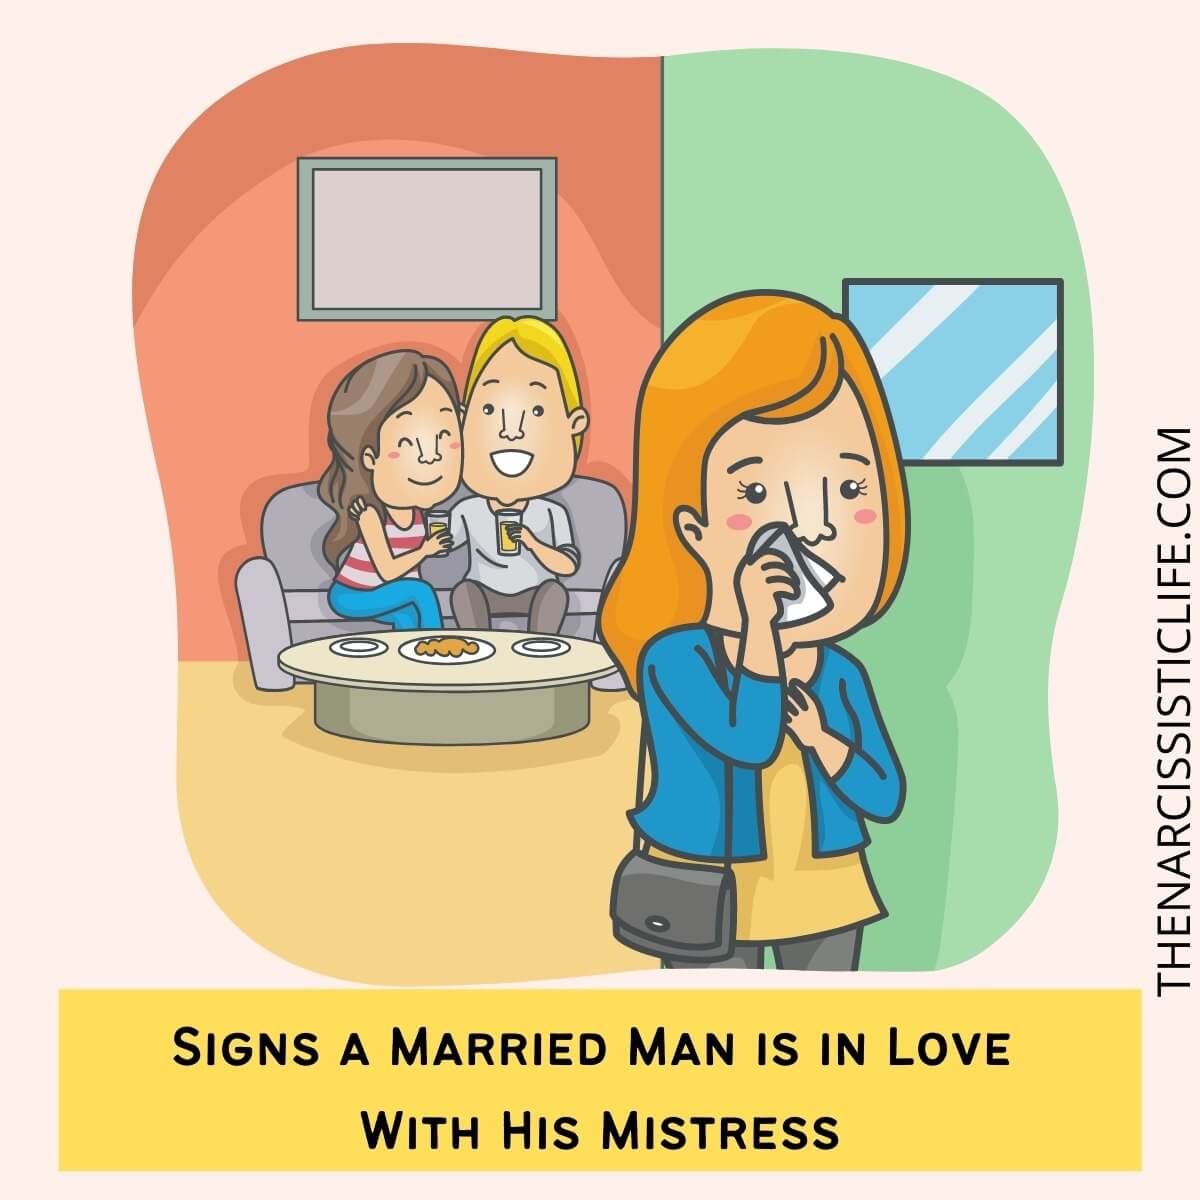 Do Married Men Miss Their Mistresses? picture